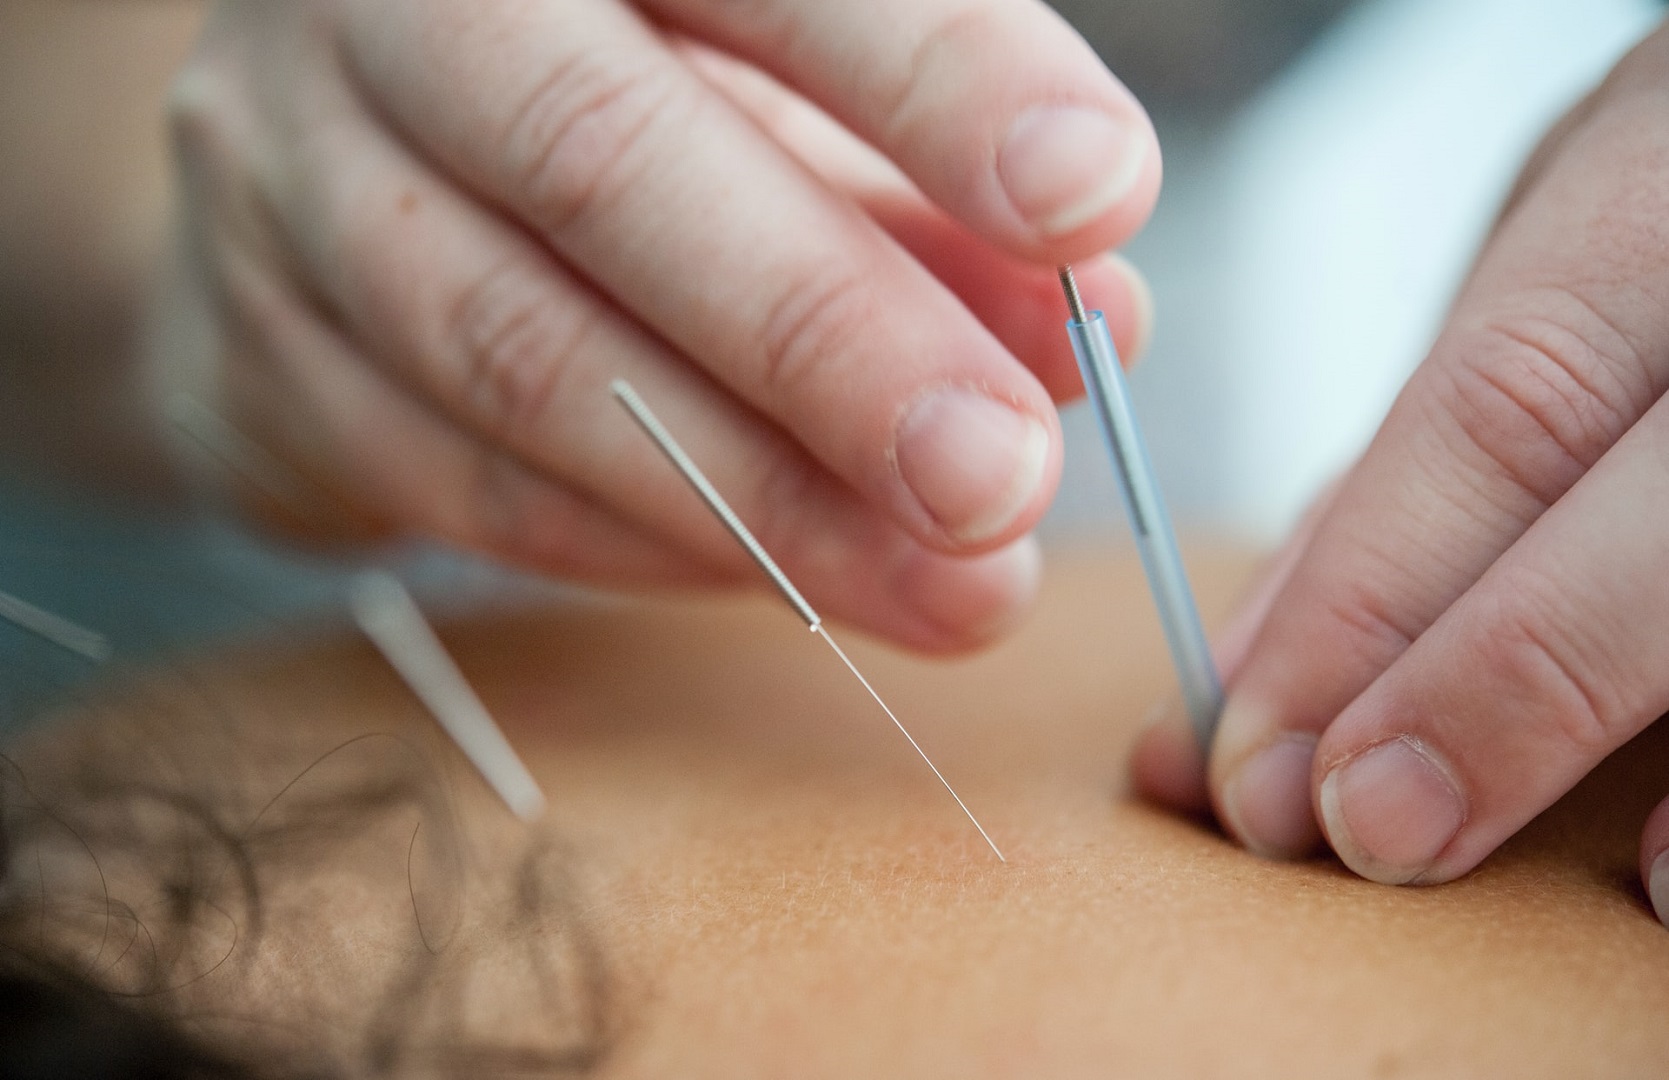 Acupuncture for IBS